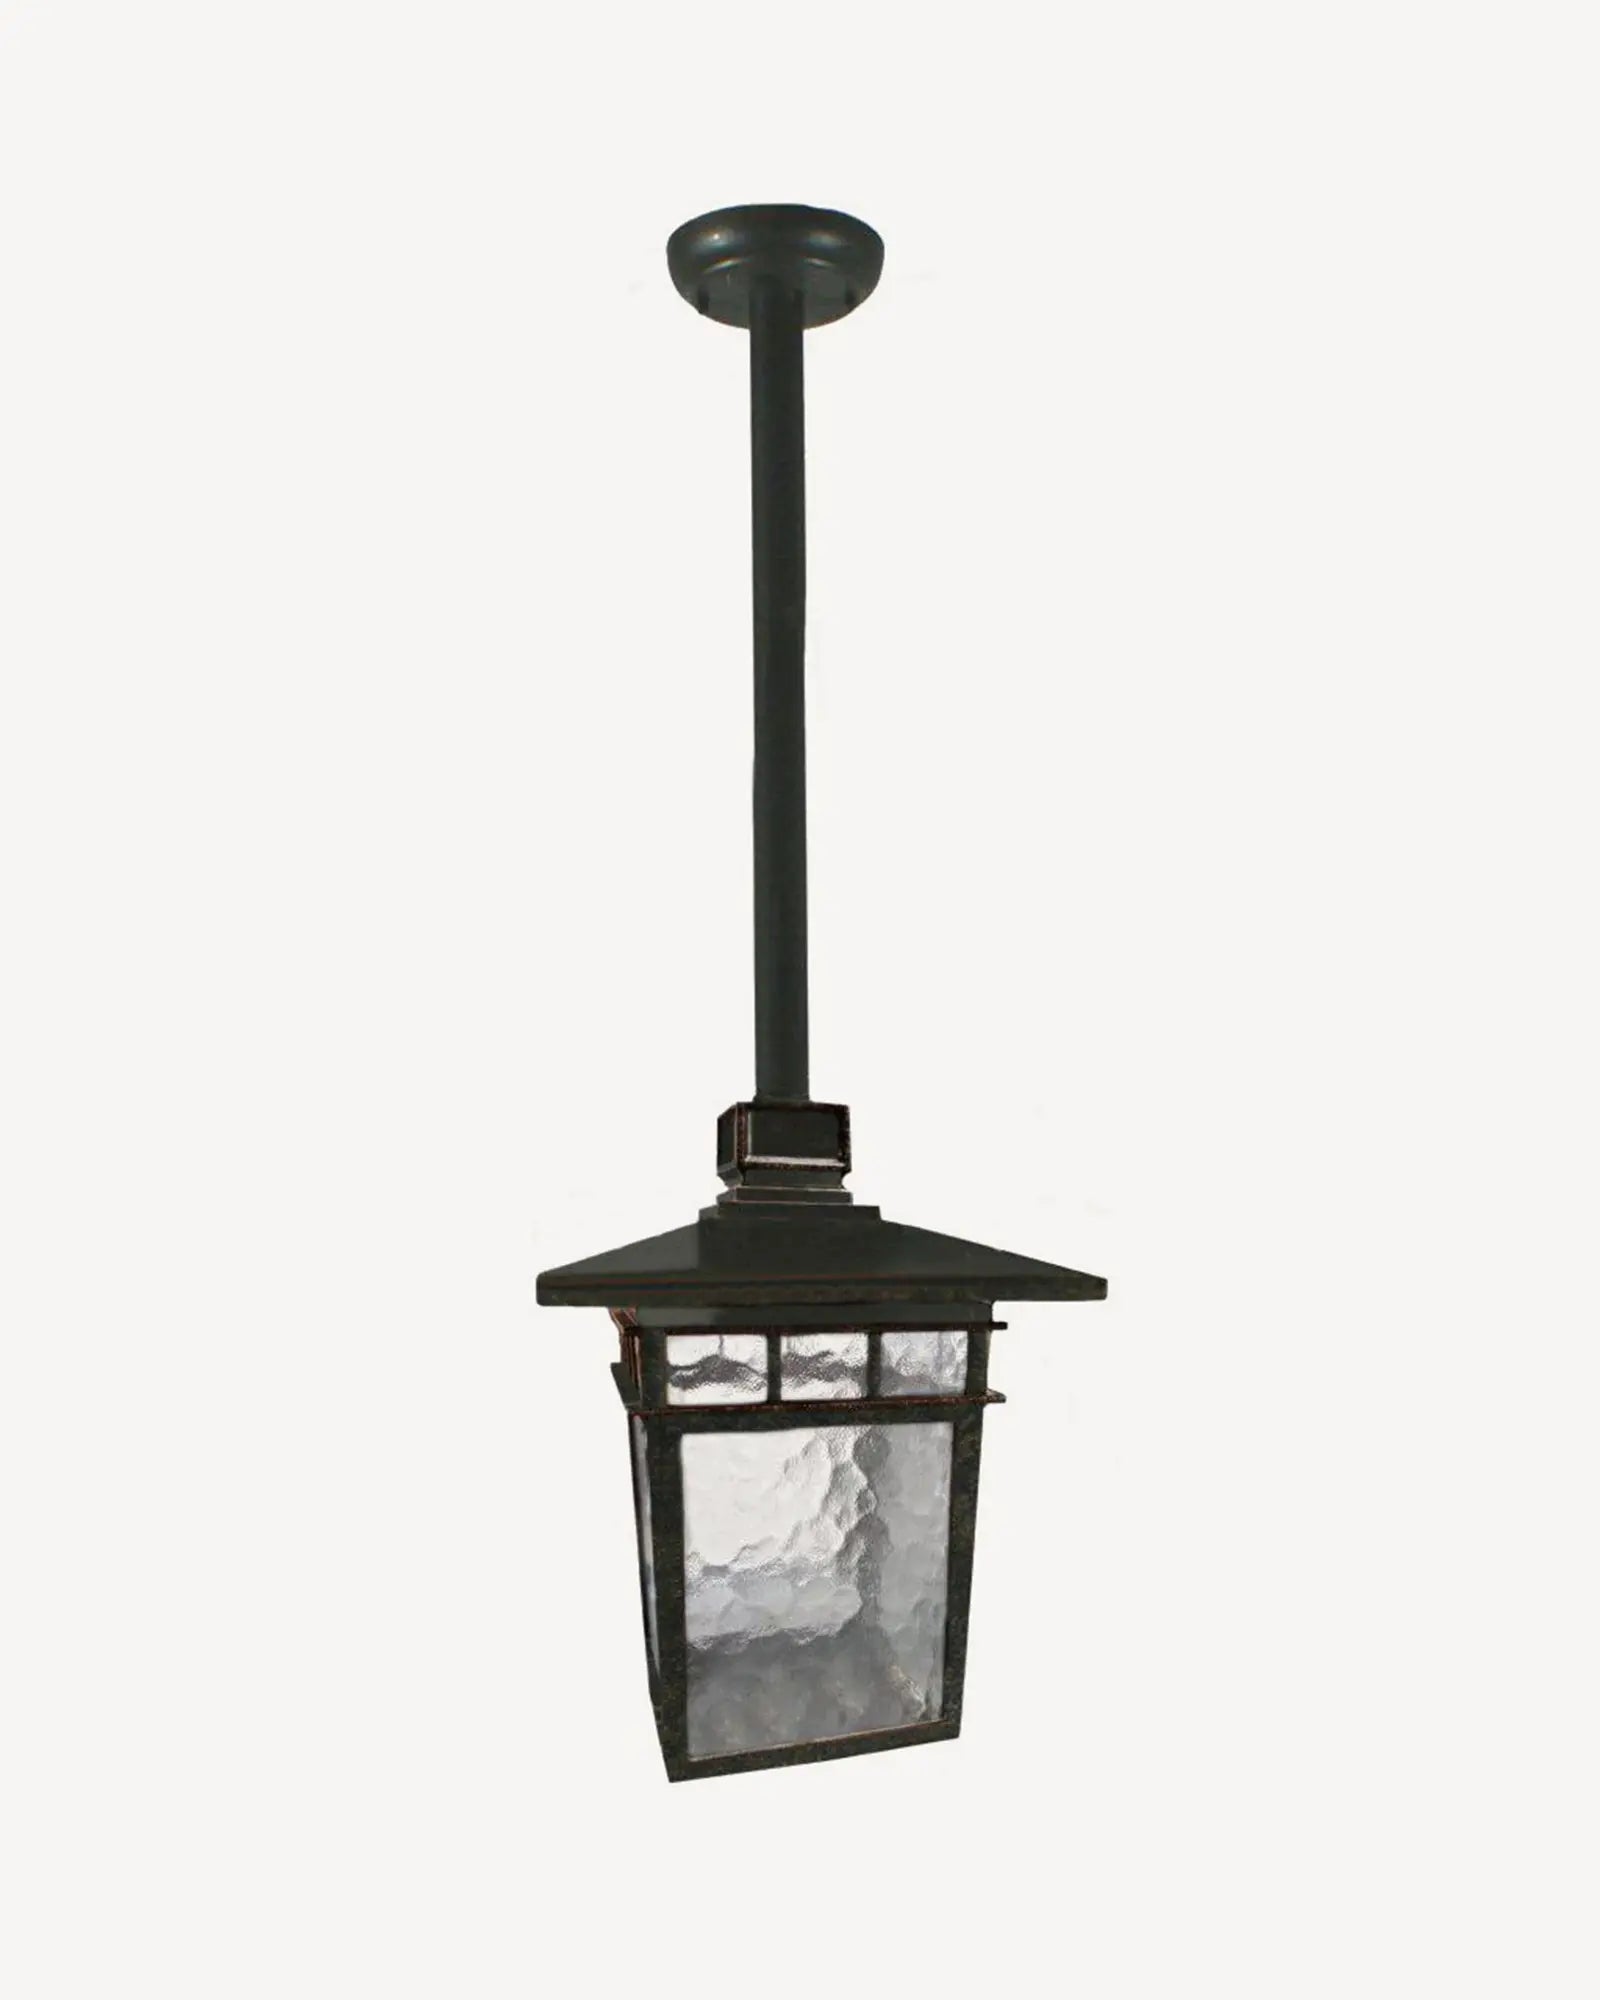 Promenade rod outdoor pendant light by Inspiration Light at Nook Collections